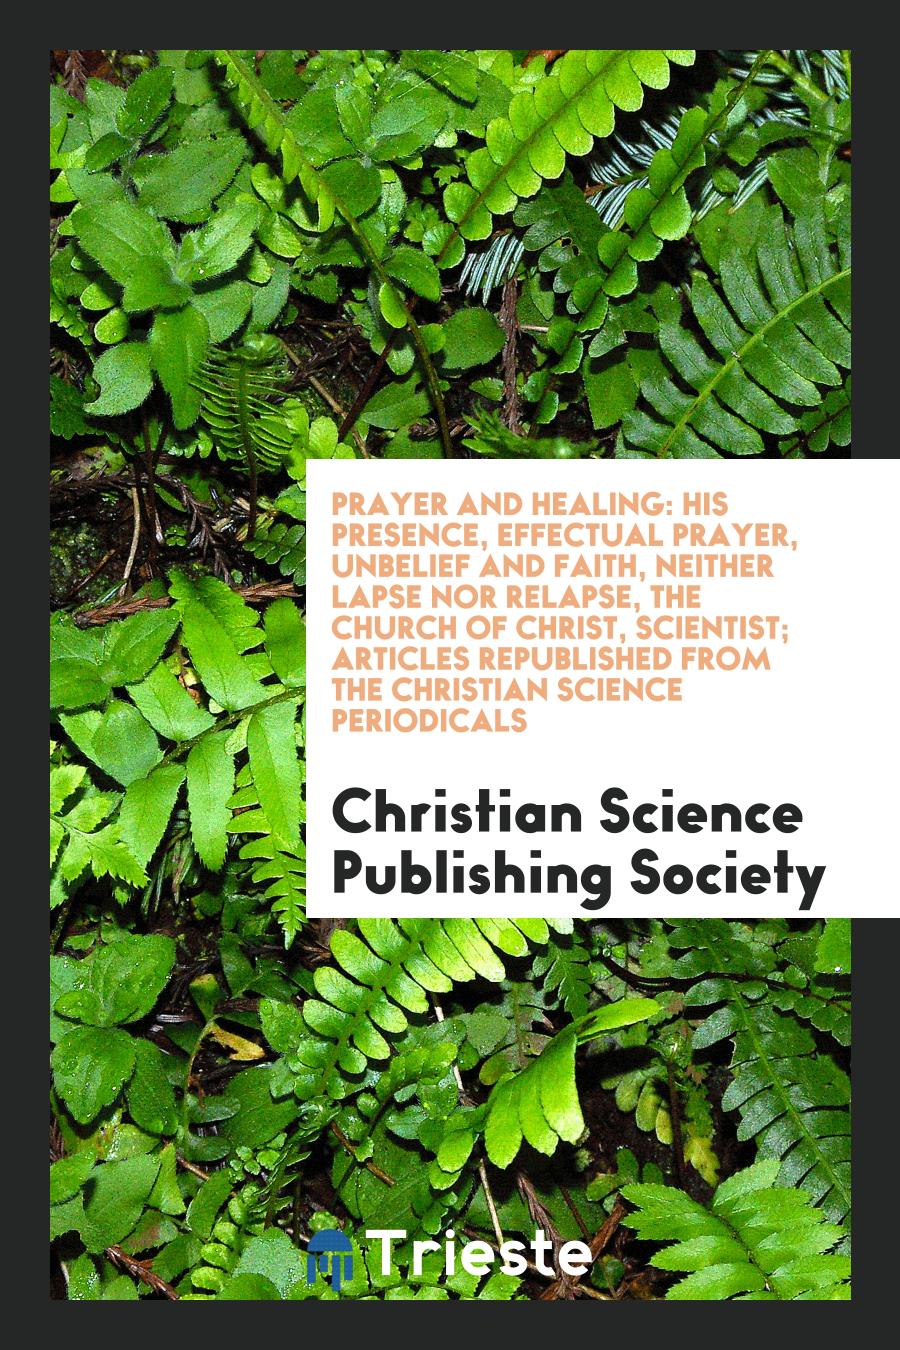 Prayer and healing: His presence, Effectual prayer, Unbelief and faith, Neither lapse nor relapse, The Church of Christ, Scientist; articles republished from the Christian science periodicals